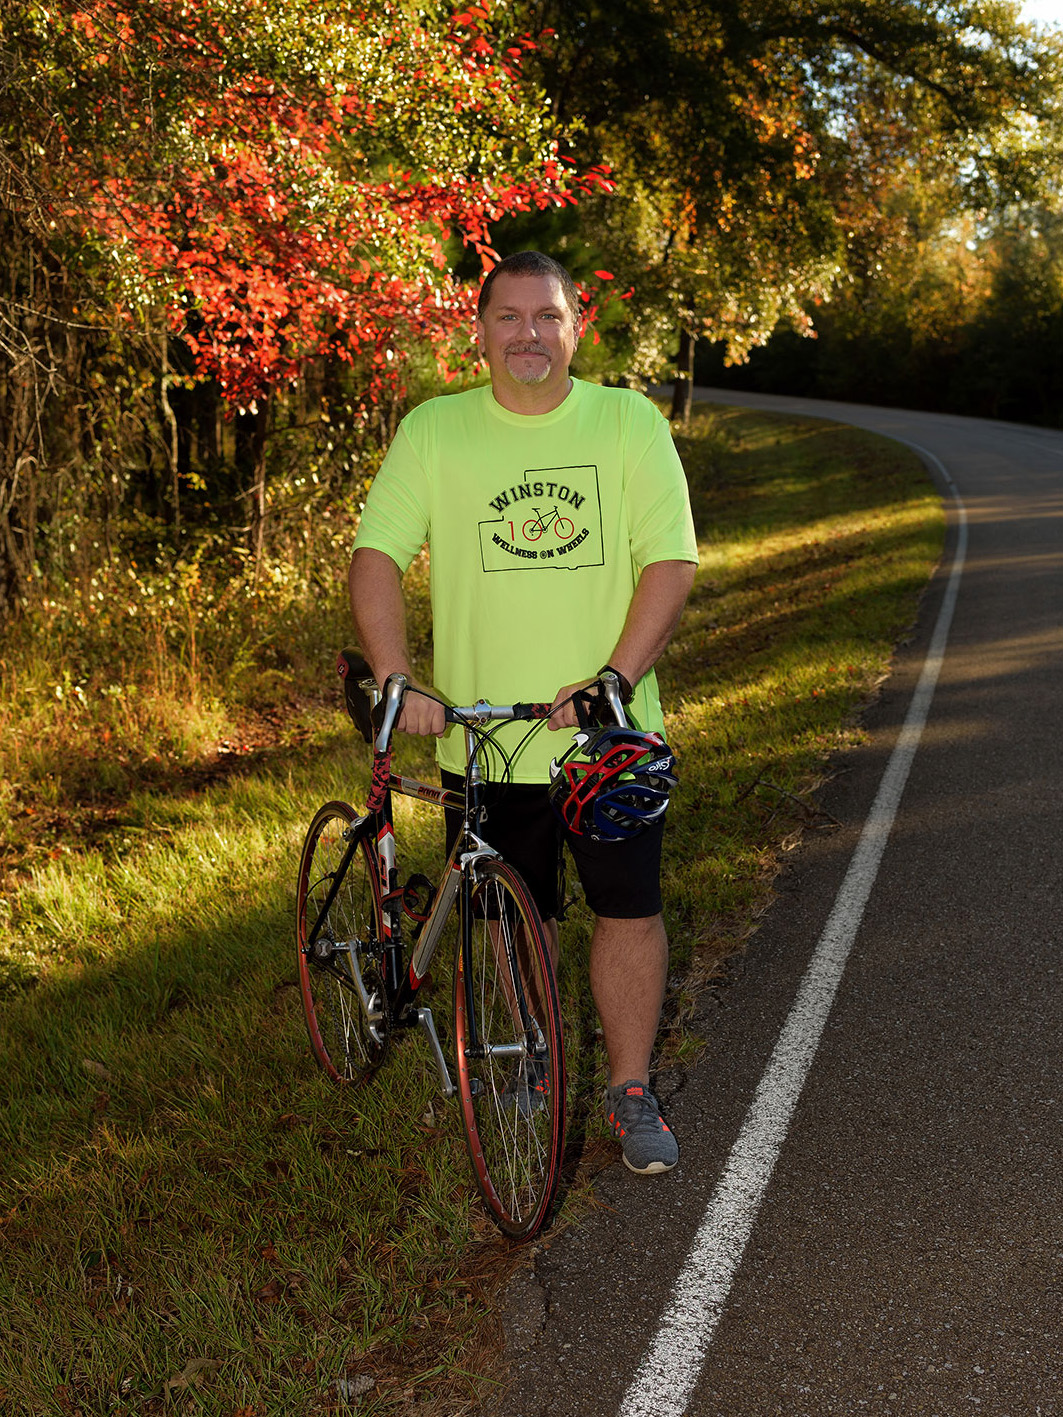 A man wearing a fluorescent green shirt stands holding the handlbars of a black and red bike on the side of a road.